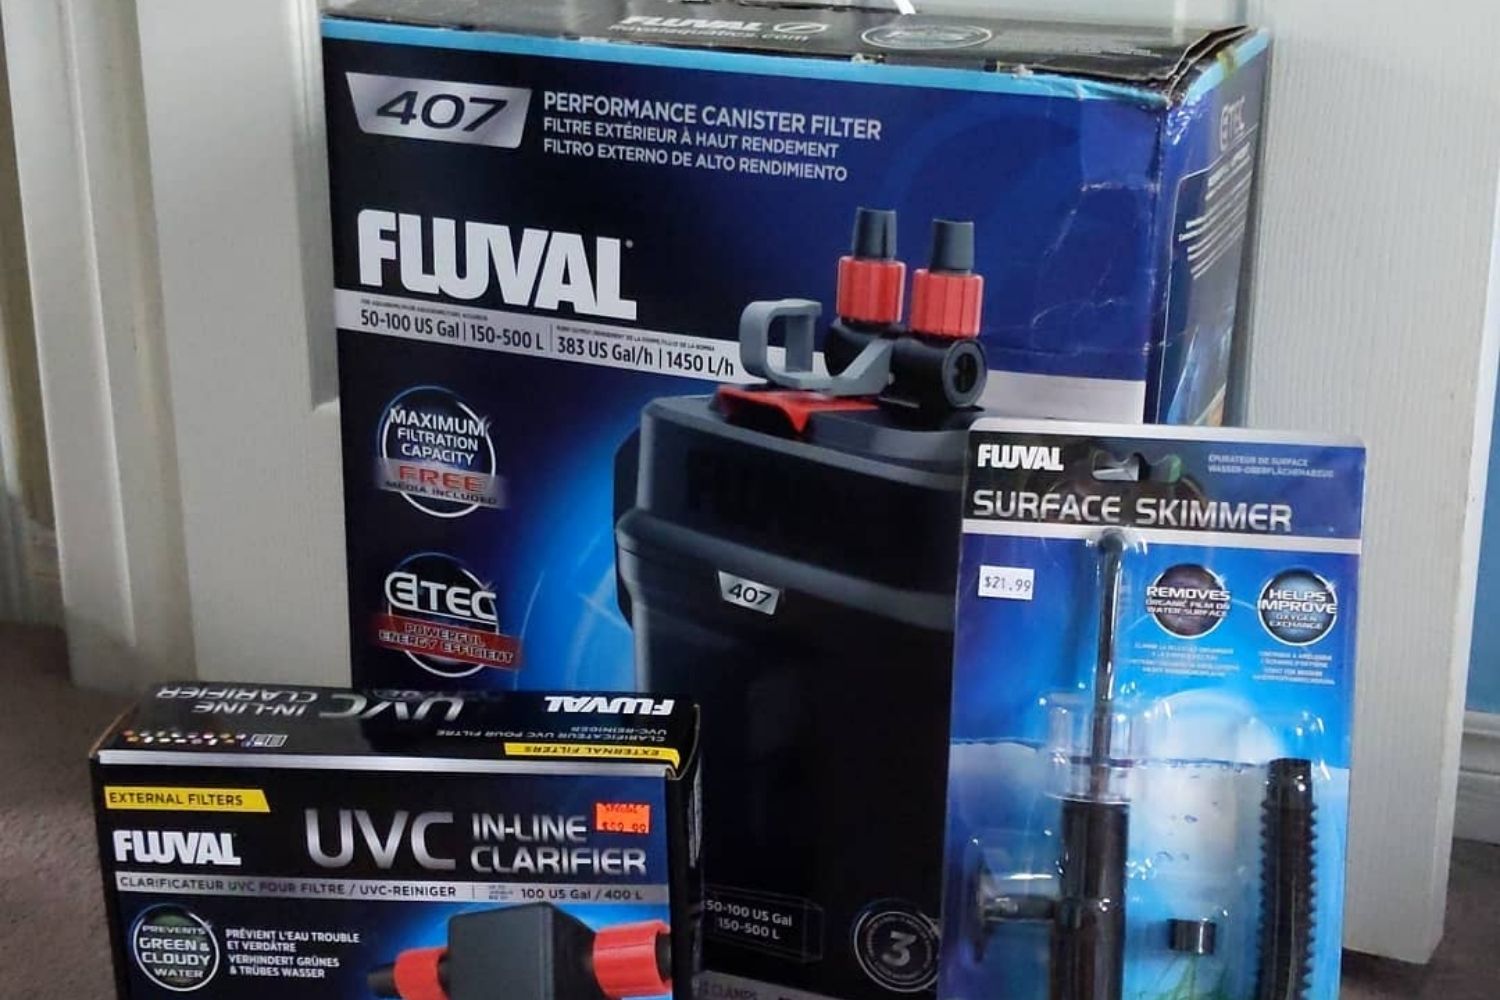 Fluval 407 Canister Filter Review Box